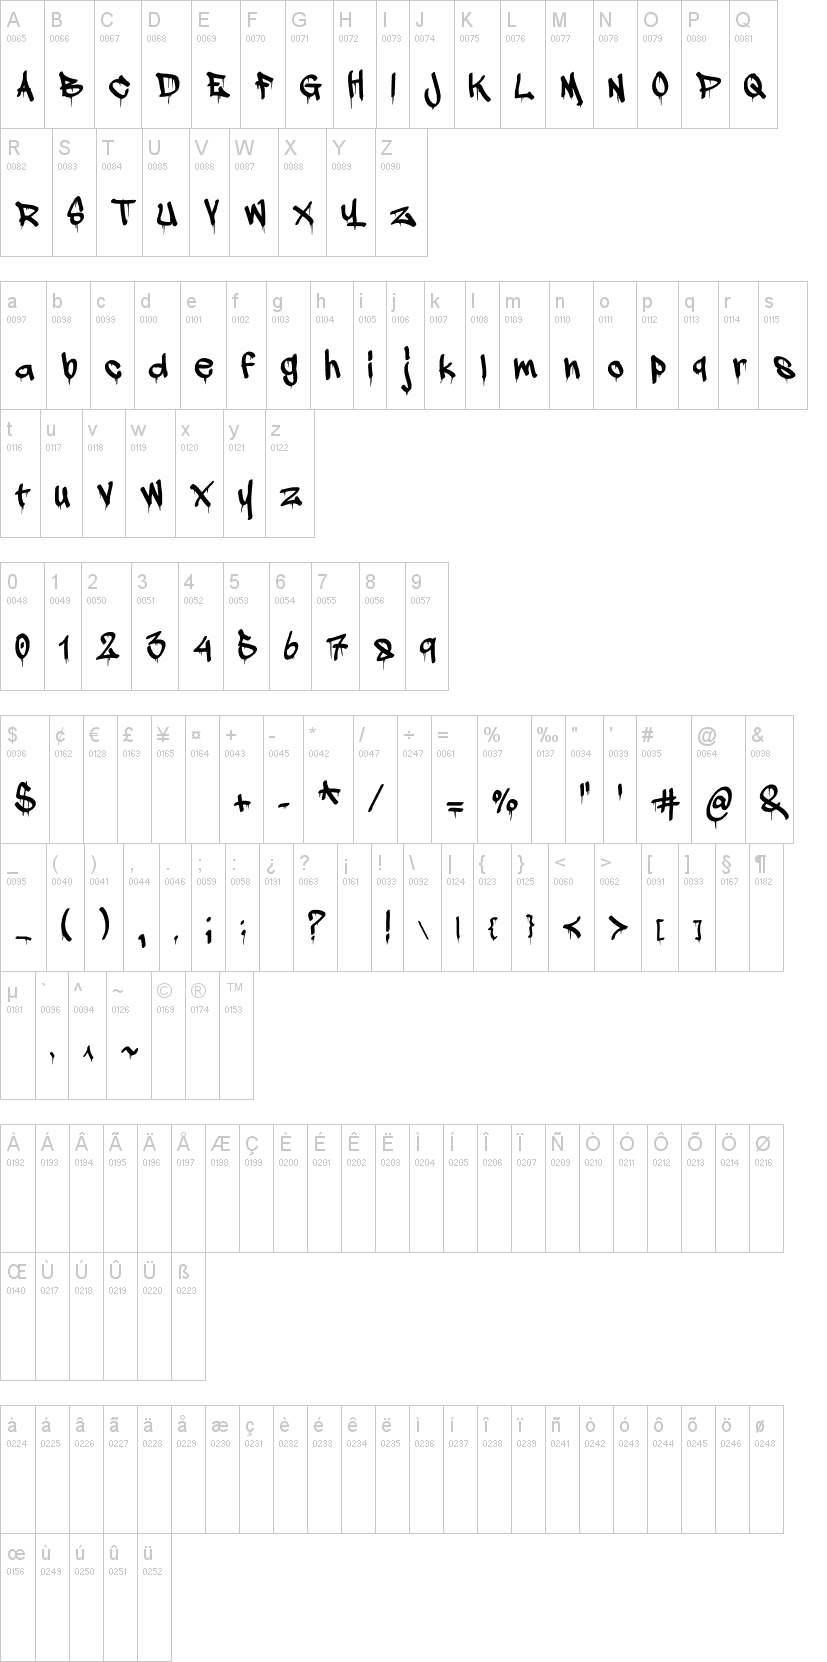 A Dripping Marker Font